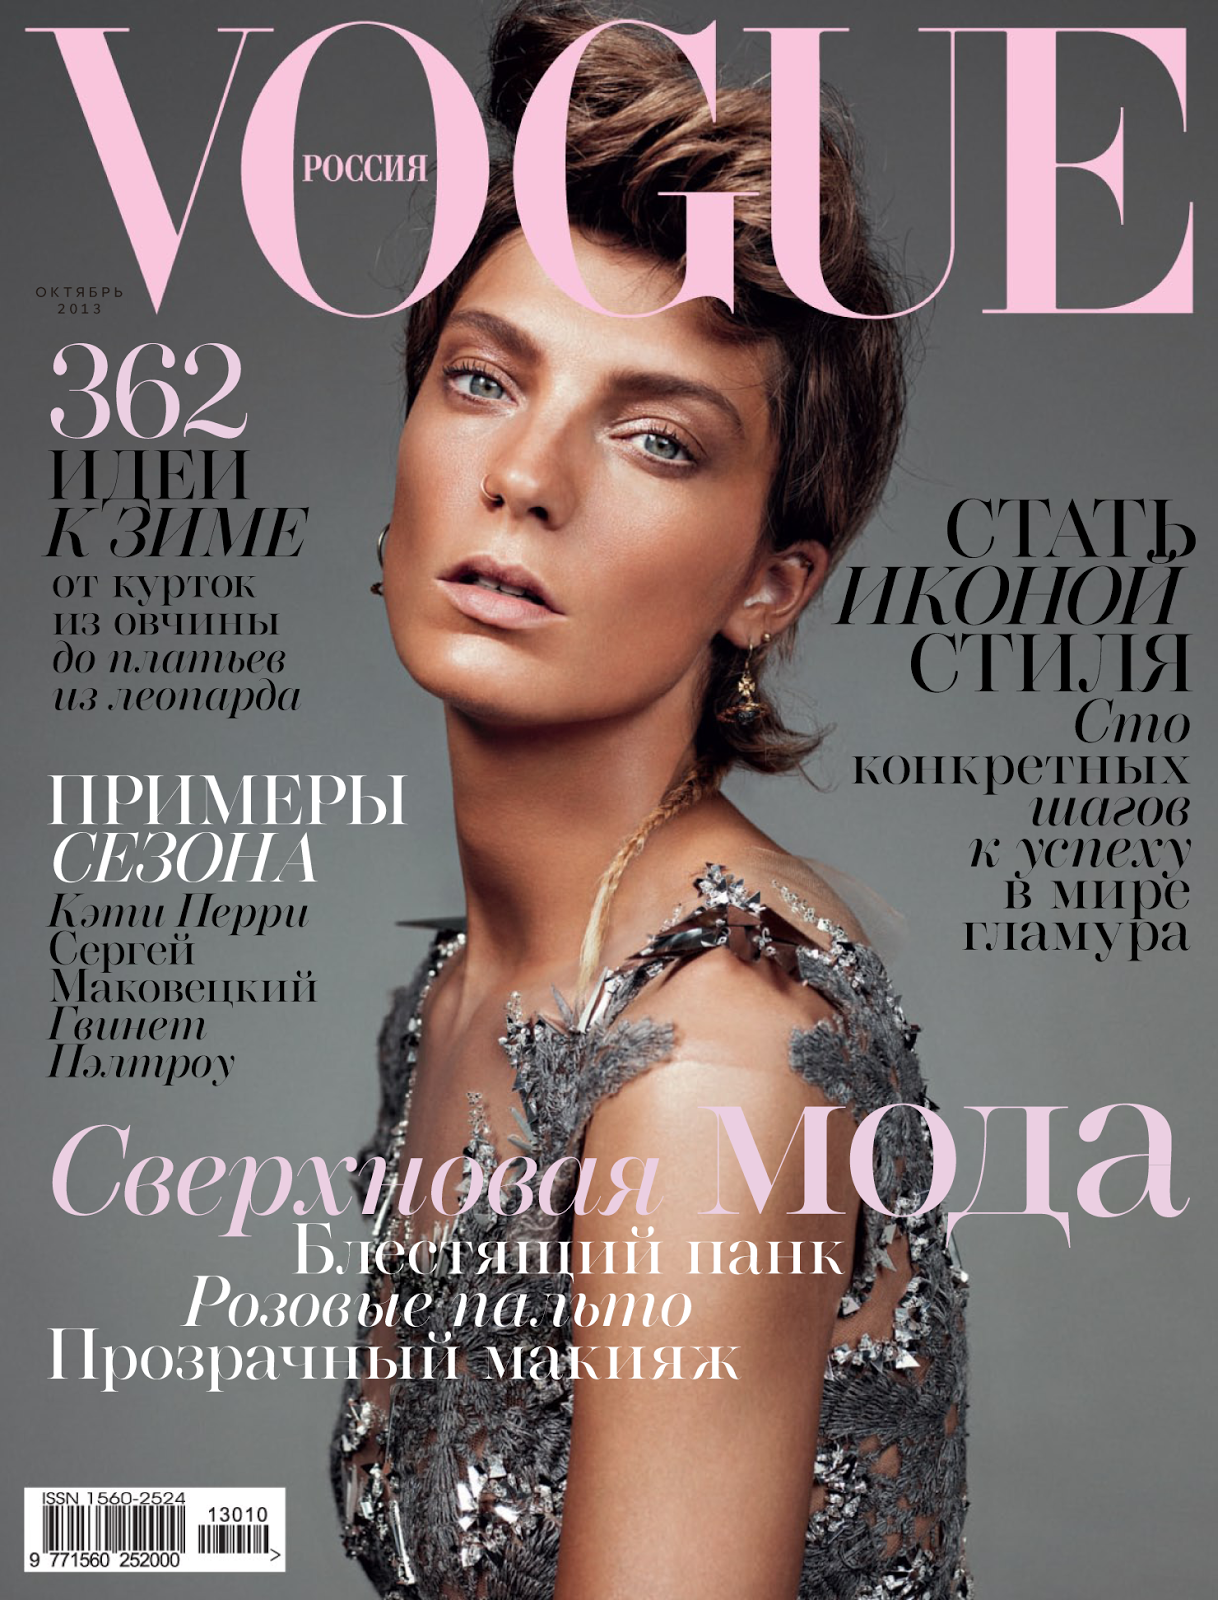 Vogue's Covers: Daria Werbowy